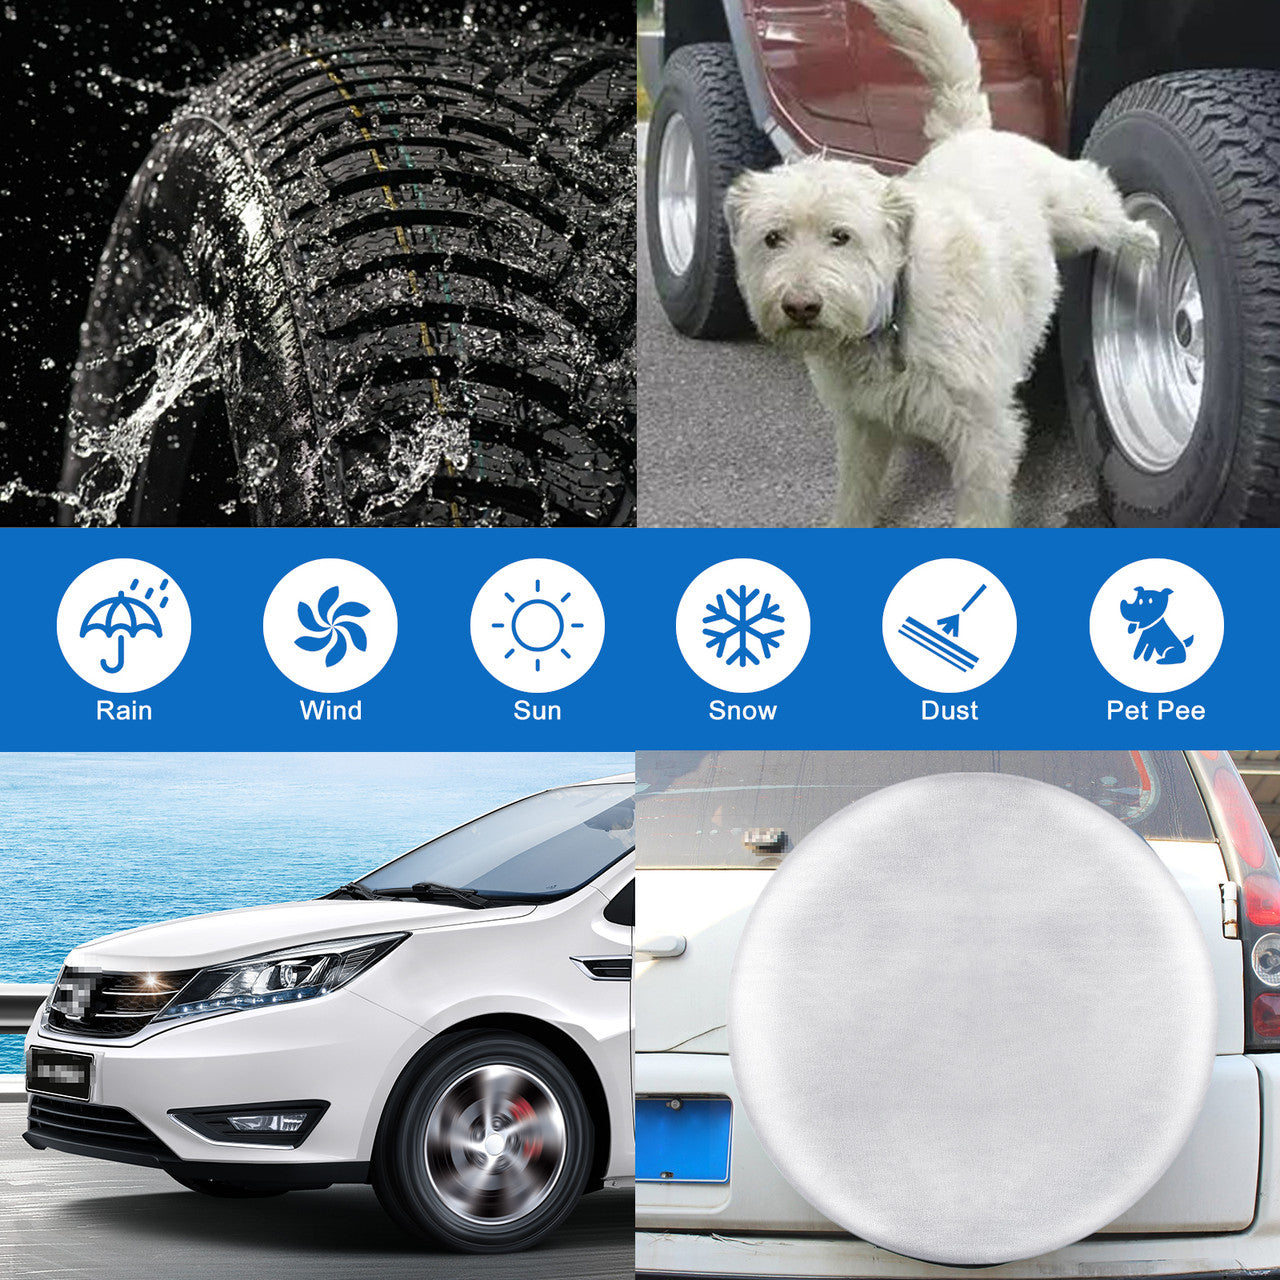 Waterproof Tire Covers for Car, Automotive Vehicle with Hook L, Silver, 4PCS